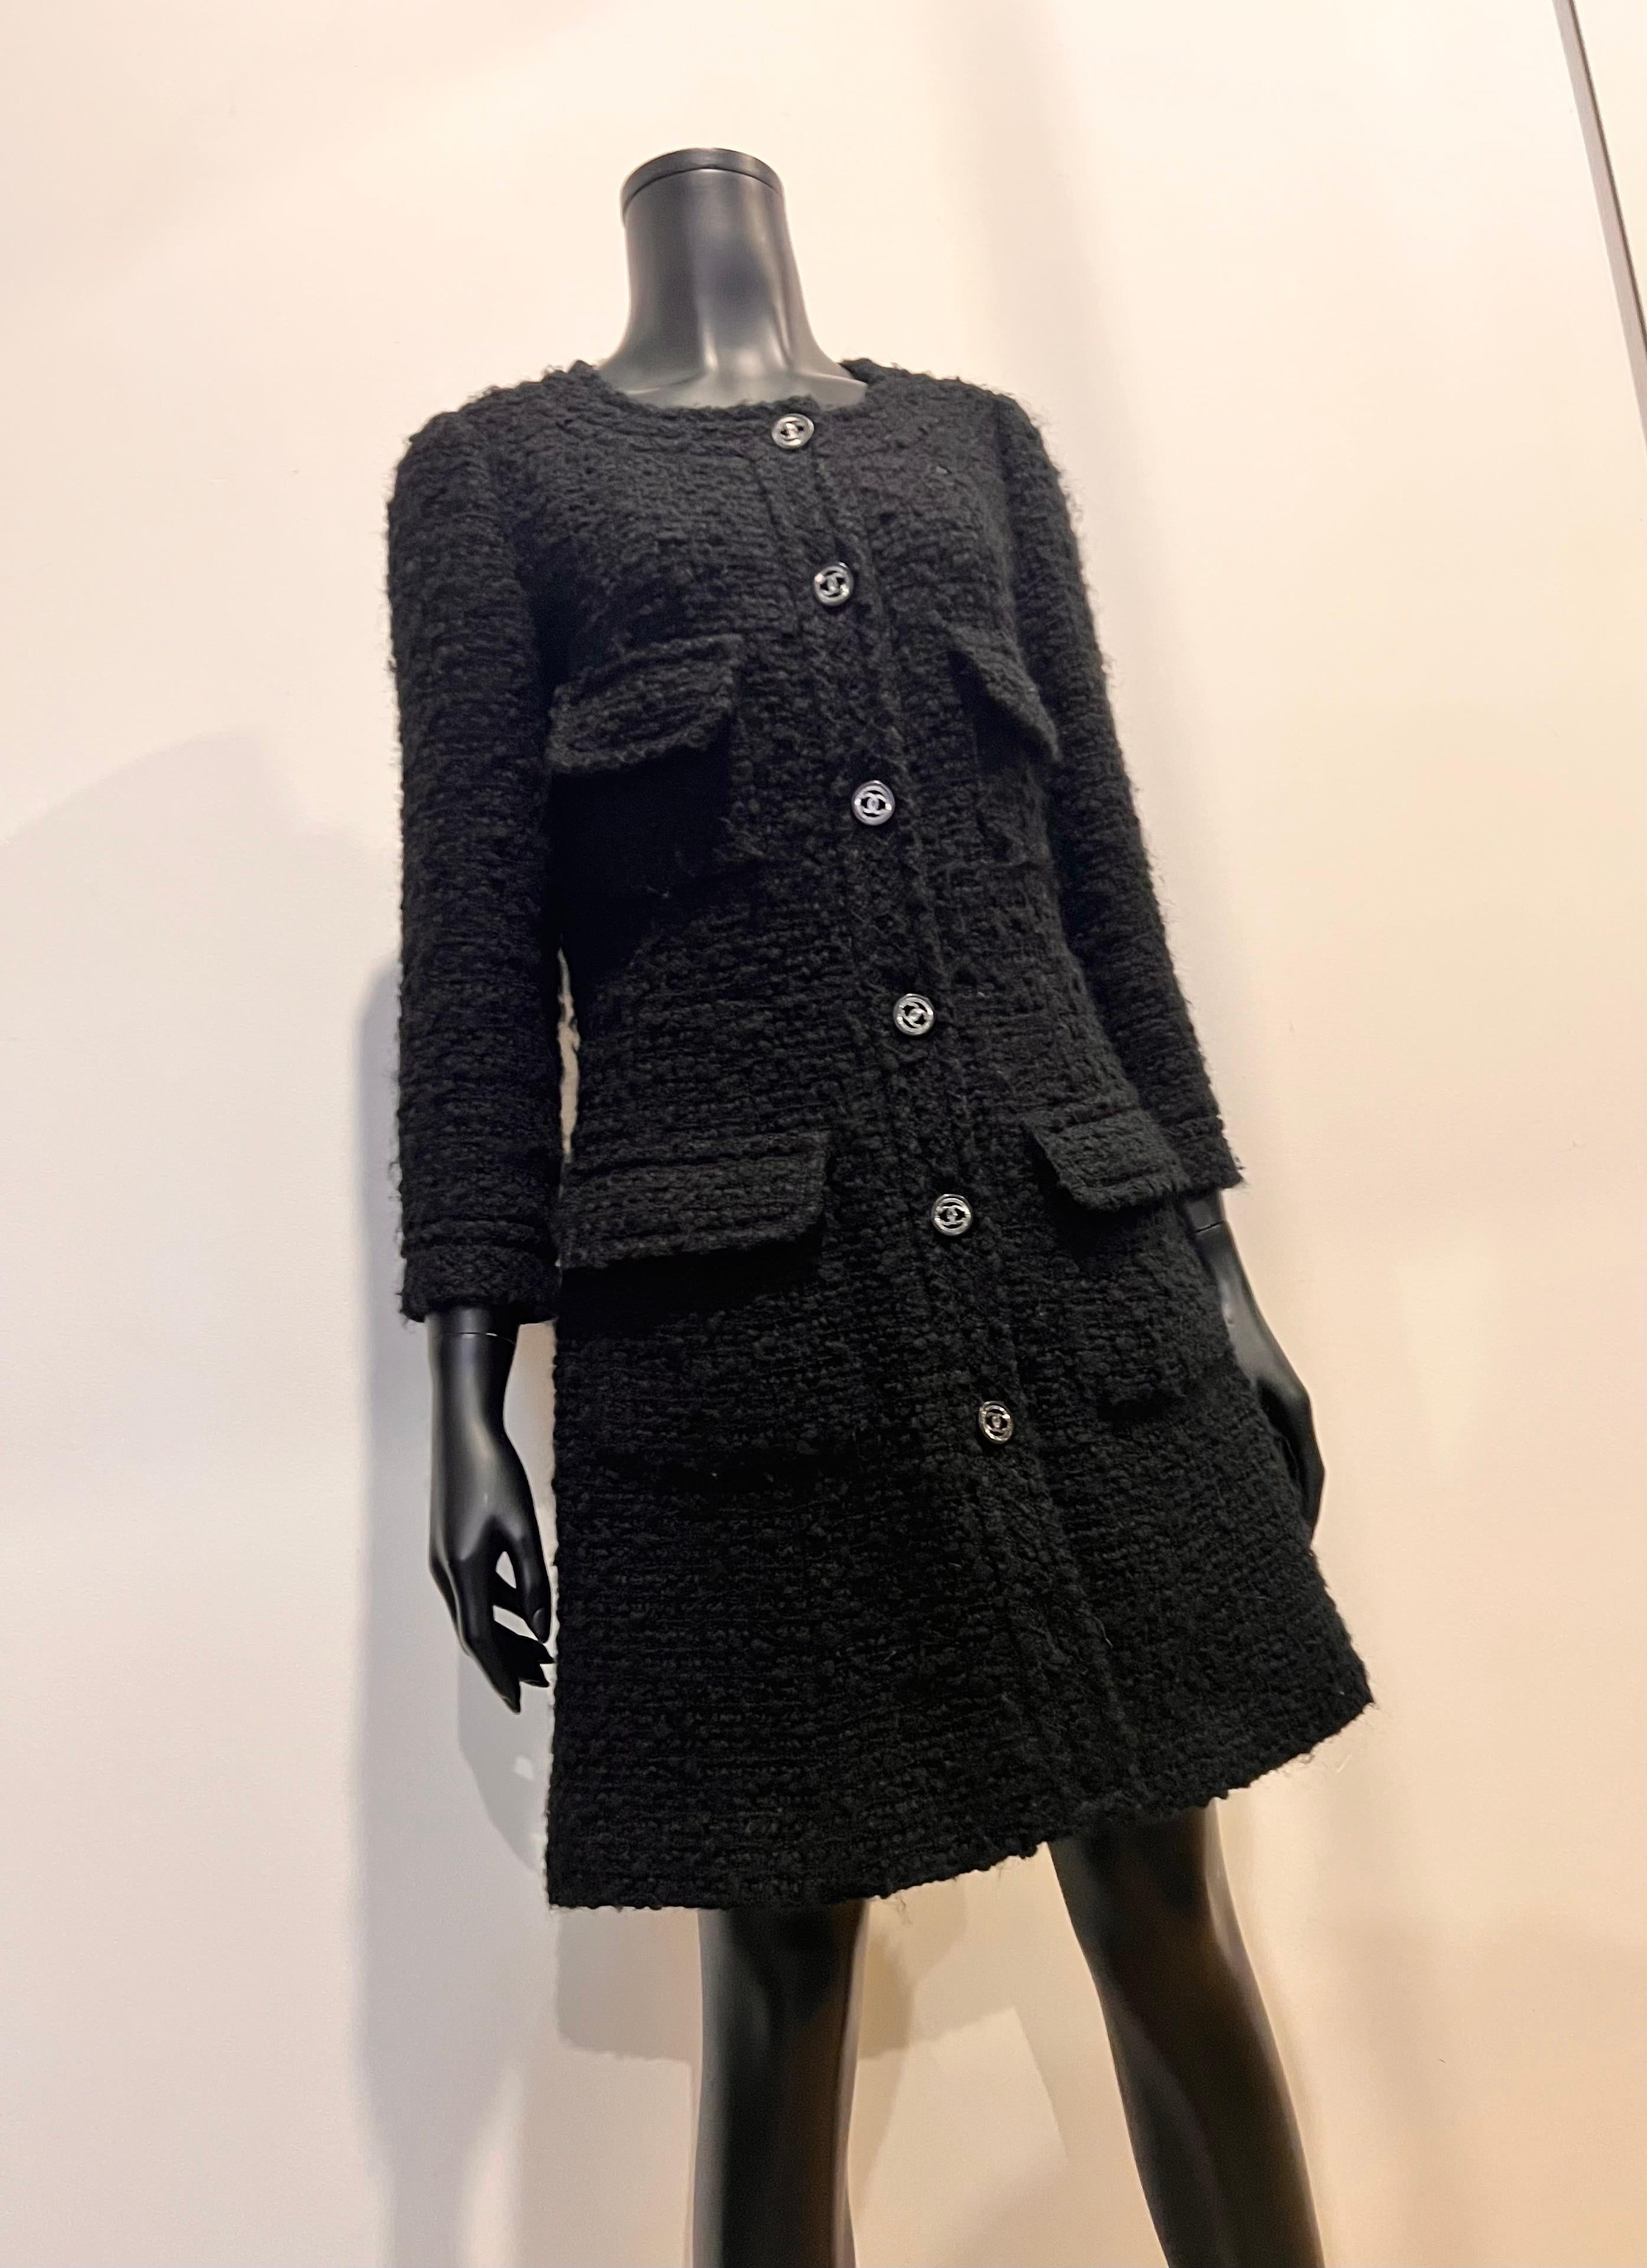 Chanel 2013 boucle tweed coat dress in black with CC details buttons  1